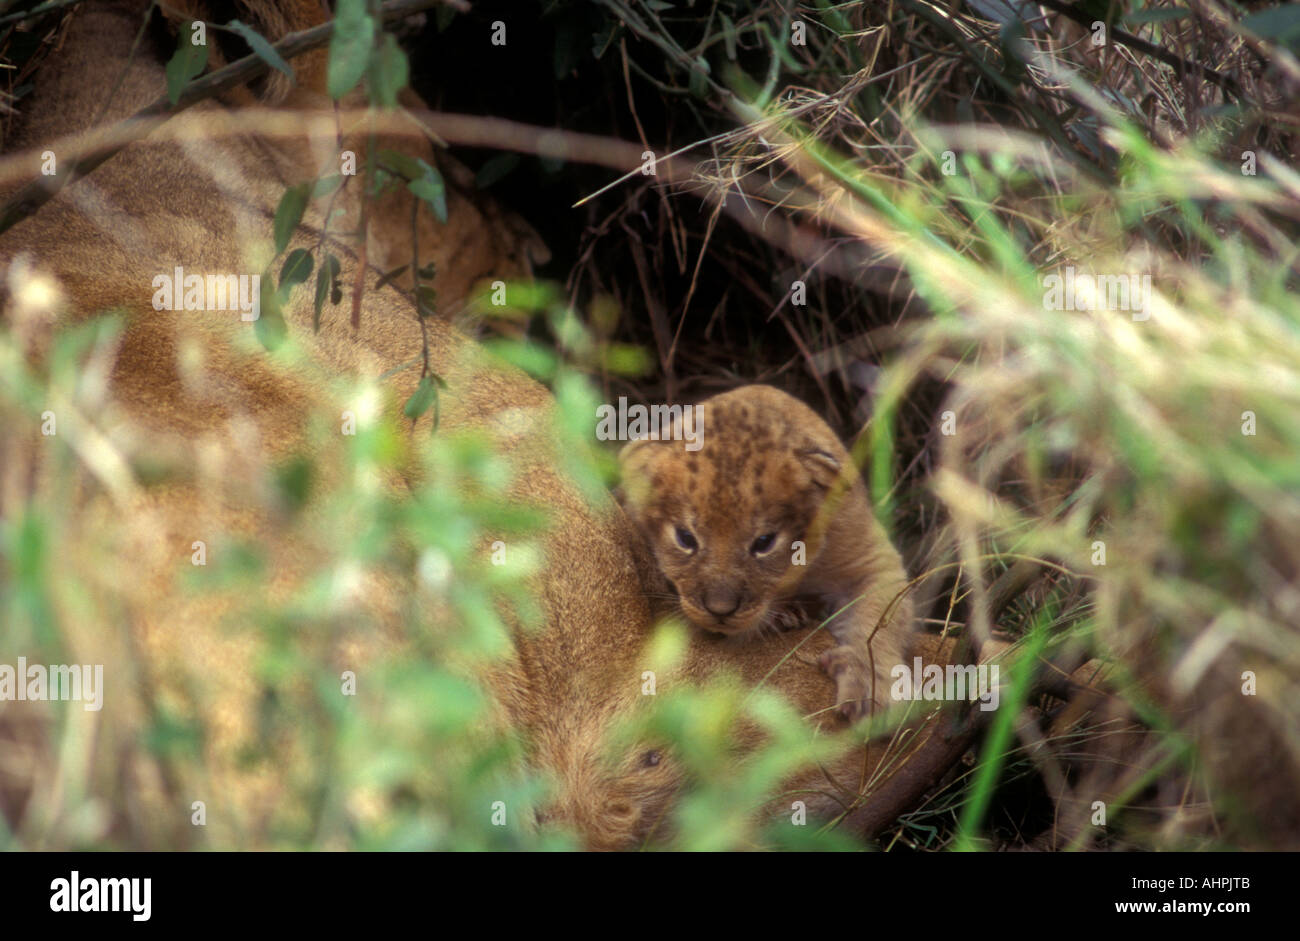 Glimpse of a tiny newly born lion cub only a few hours old Masai Mara National Reserve Kenya East Africa Stock Photo